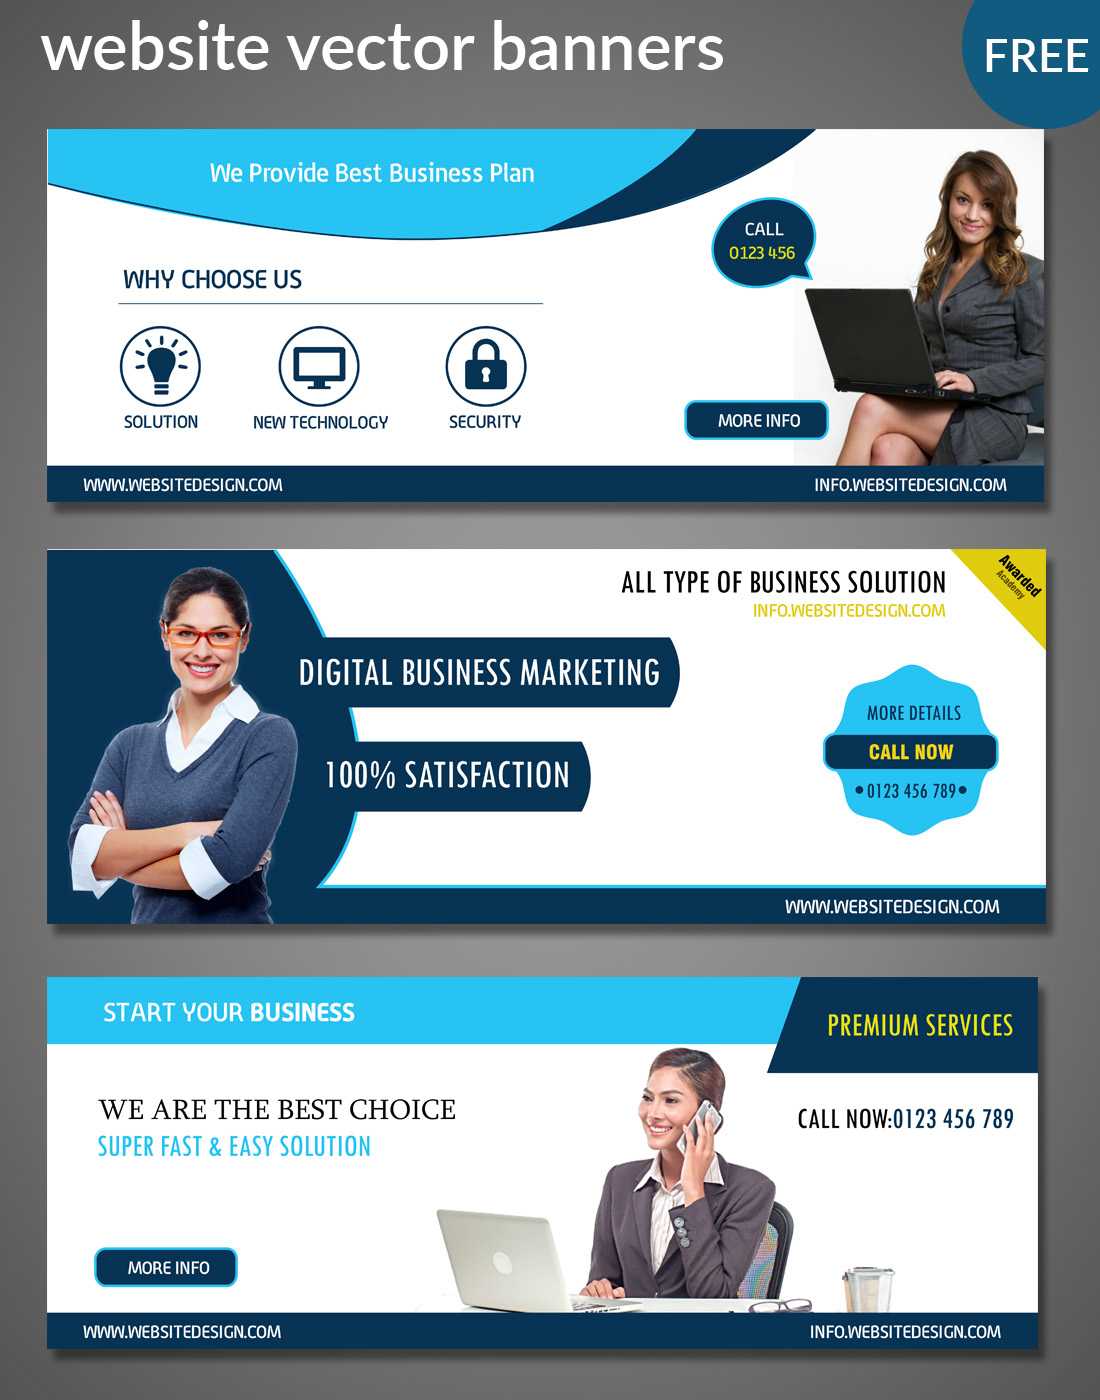 Website Banners Templates With Free Online Banner Templates